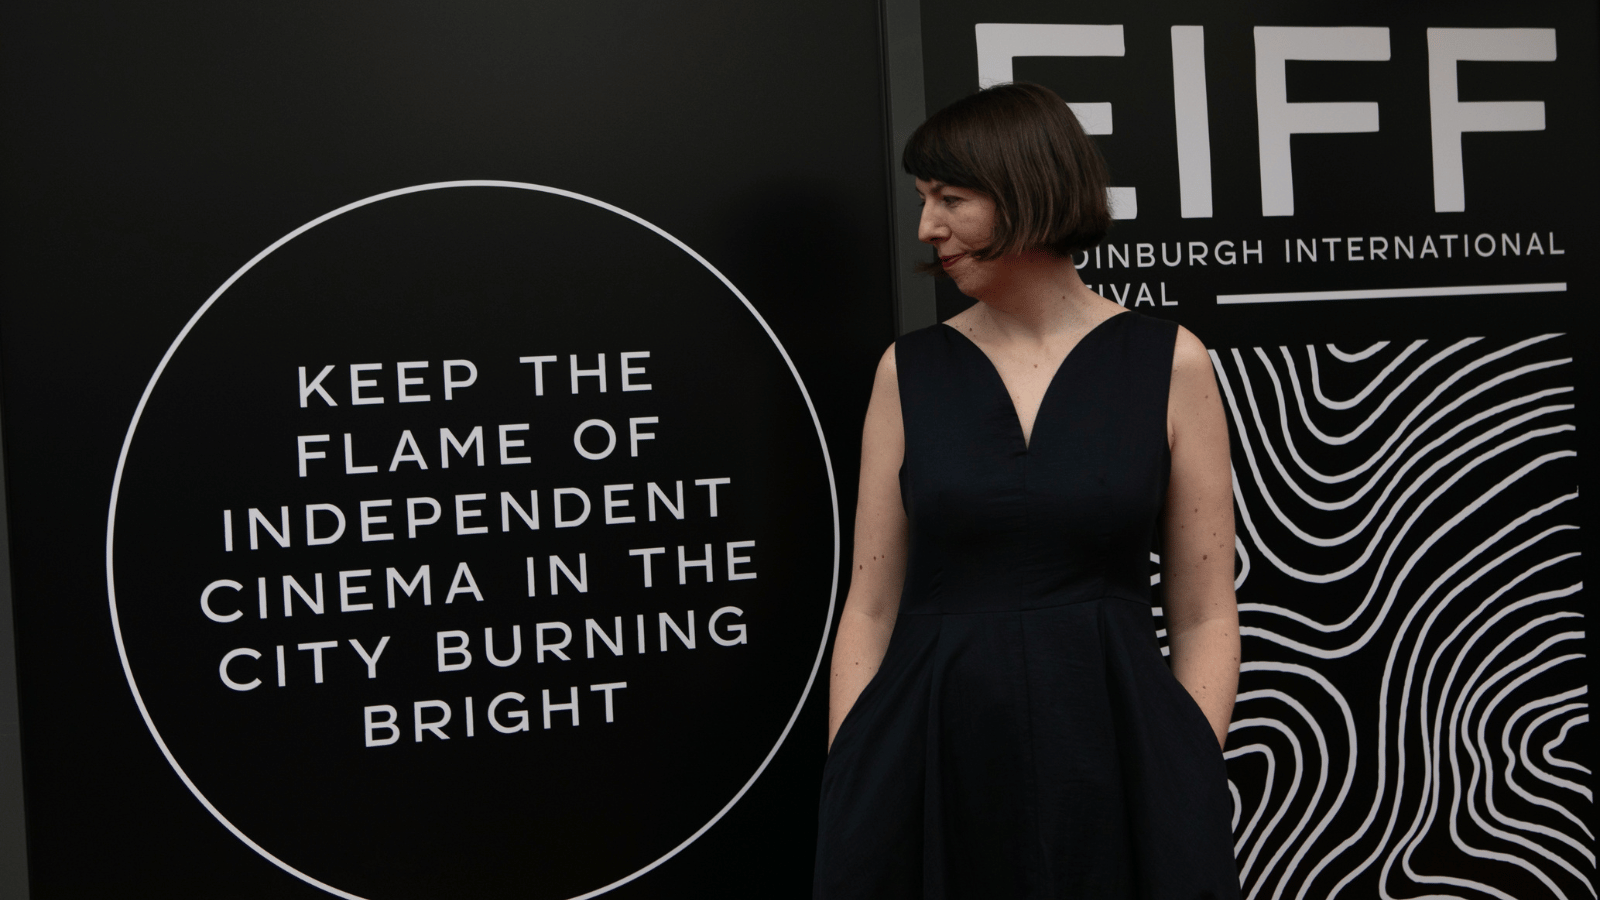 Kate Taylor at EIFF Opening Night. Stood in front of EIFF branded sign saying "keeping the fame of independent cinema alive"